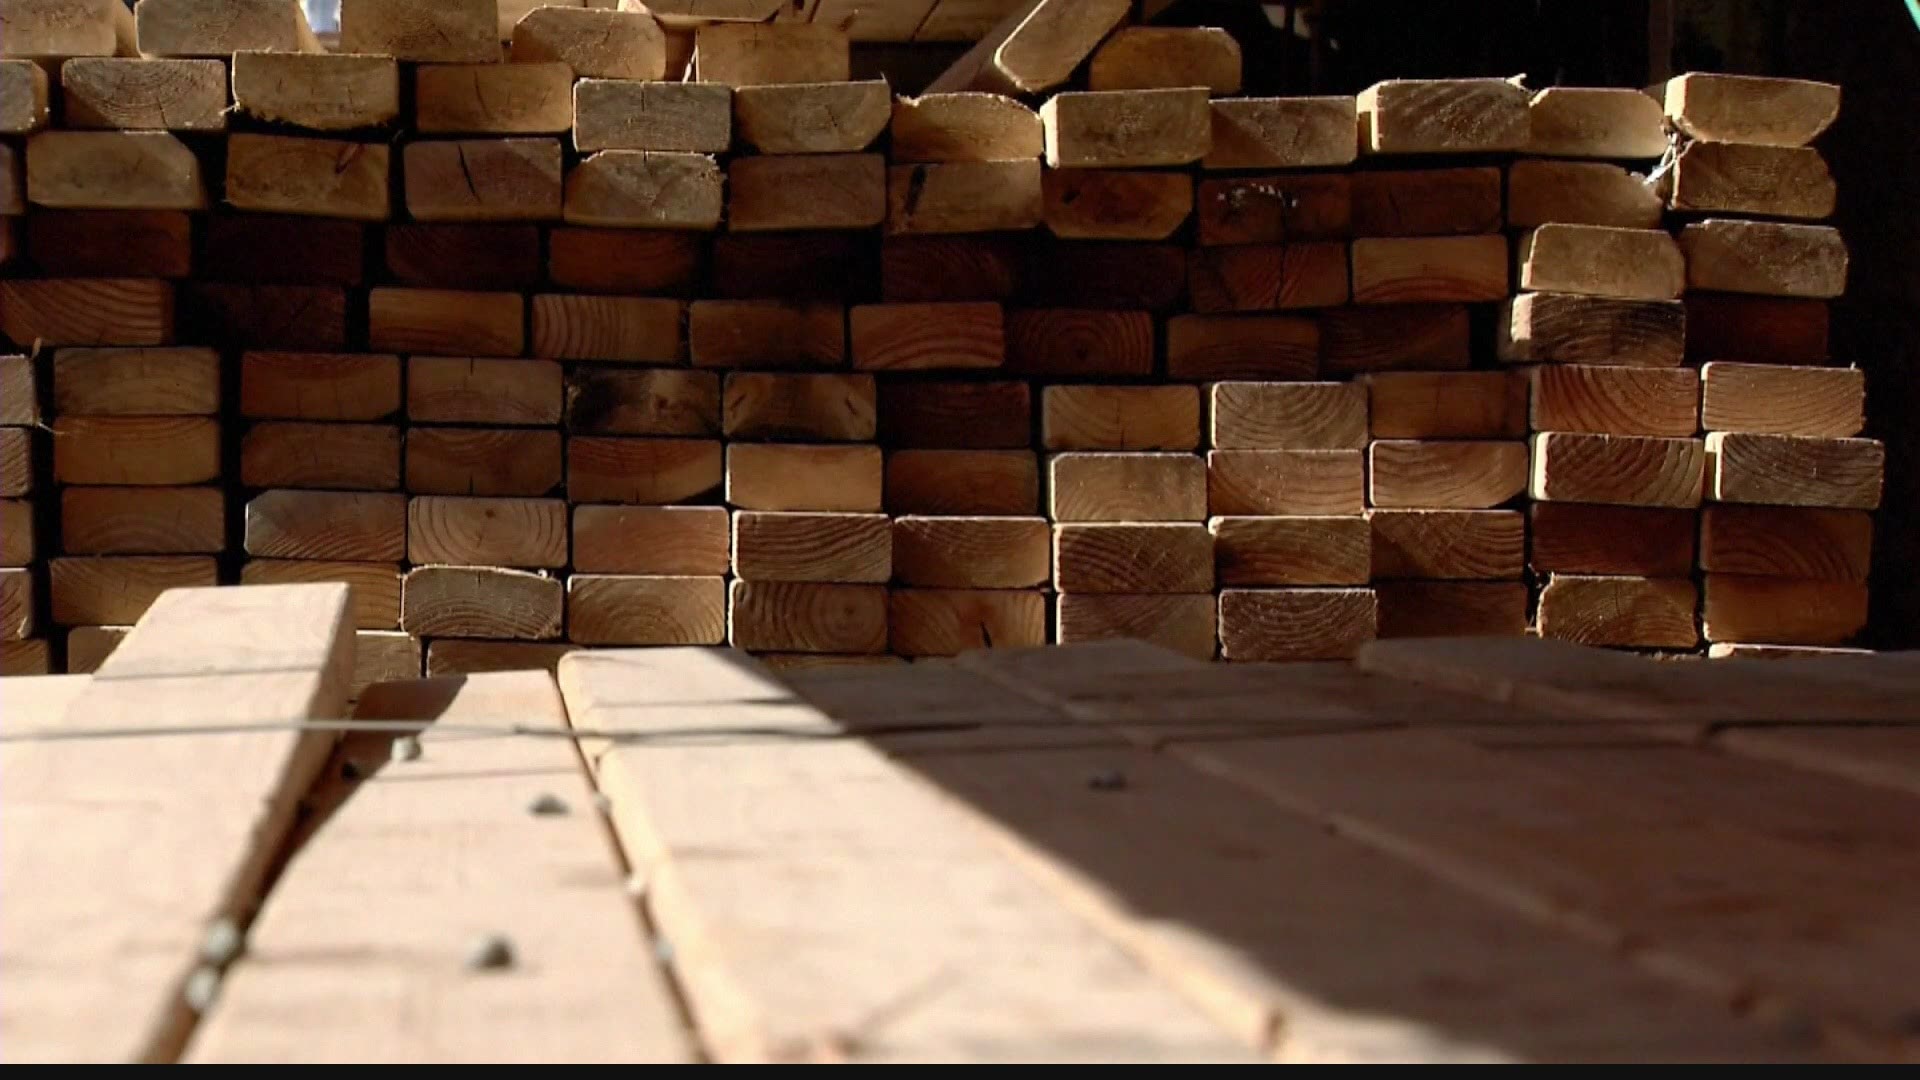 After wild price increases, lumber costs are finally easing.